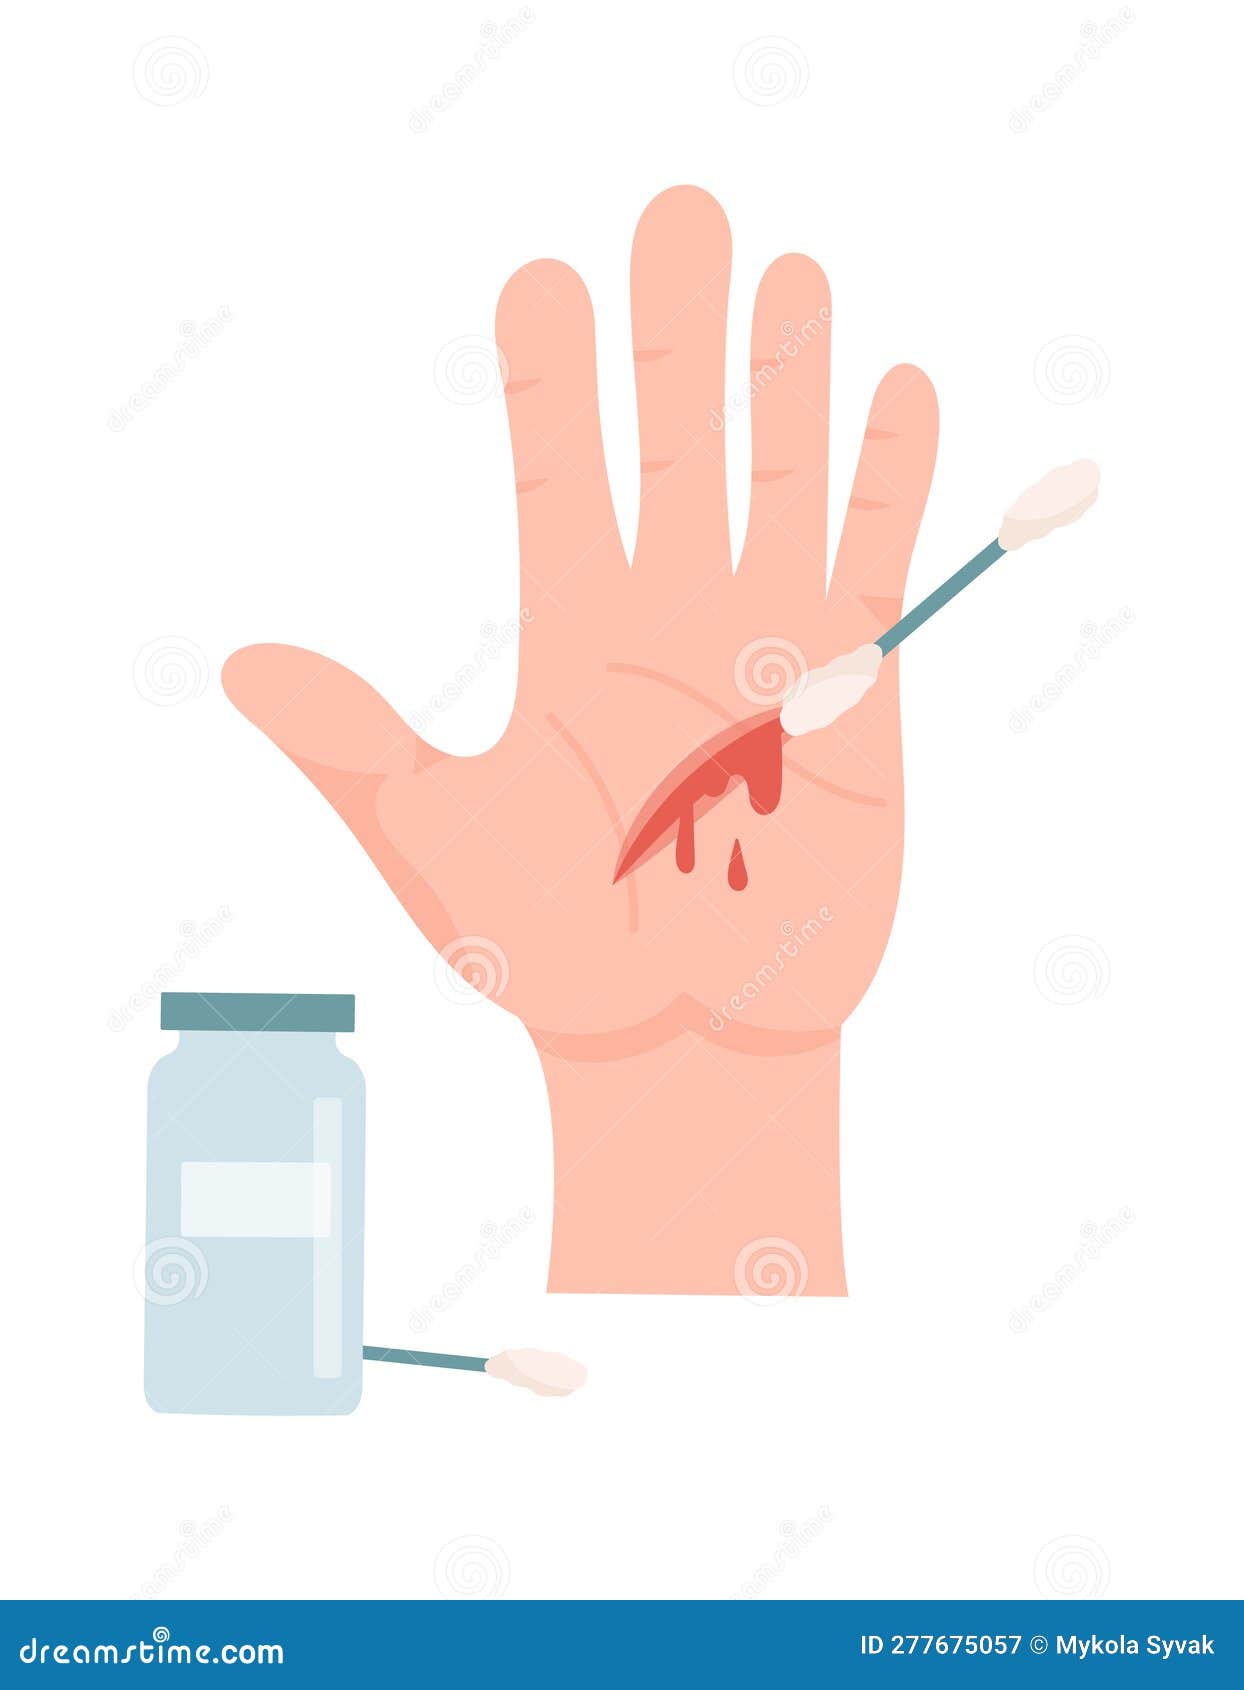 First Aid Hand Treatment stock vector. Illustration of medicine - 277675057